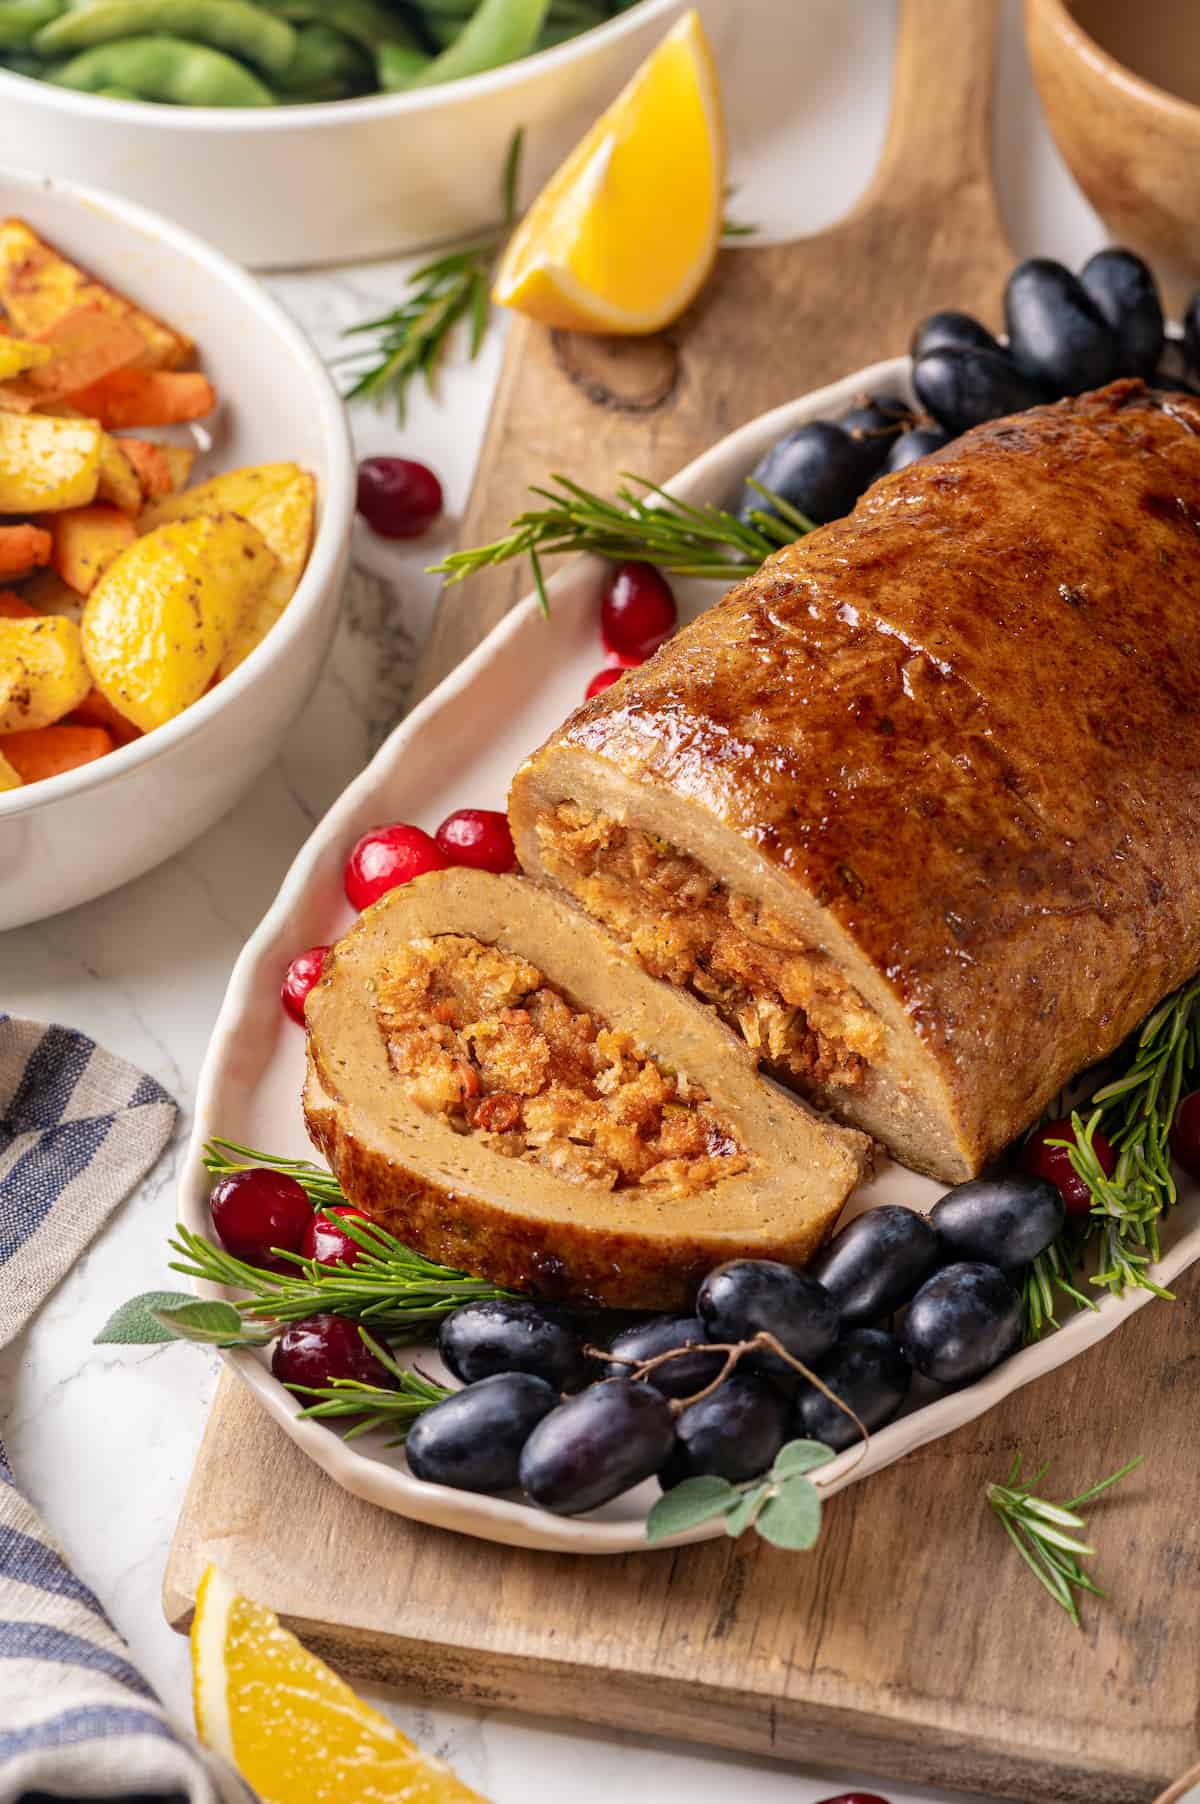 Review: Finding the Best Vegan Roast to Buy for the Holidays